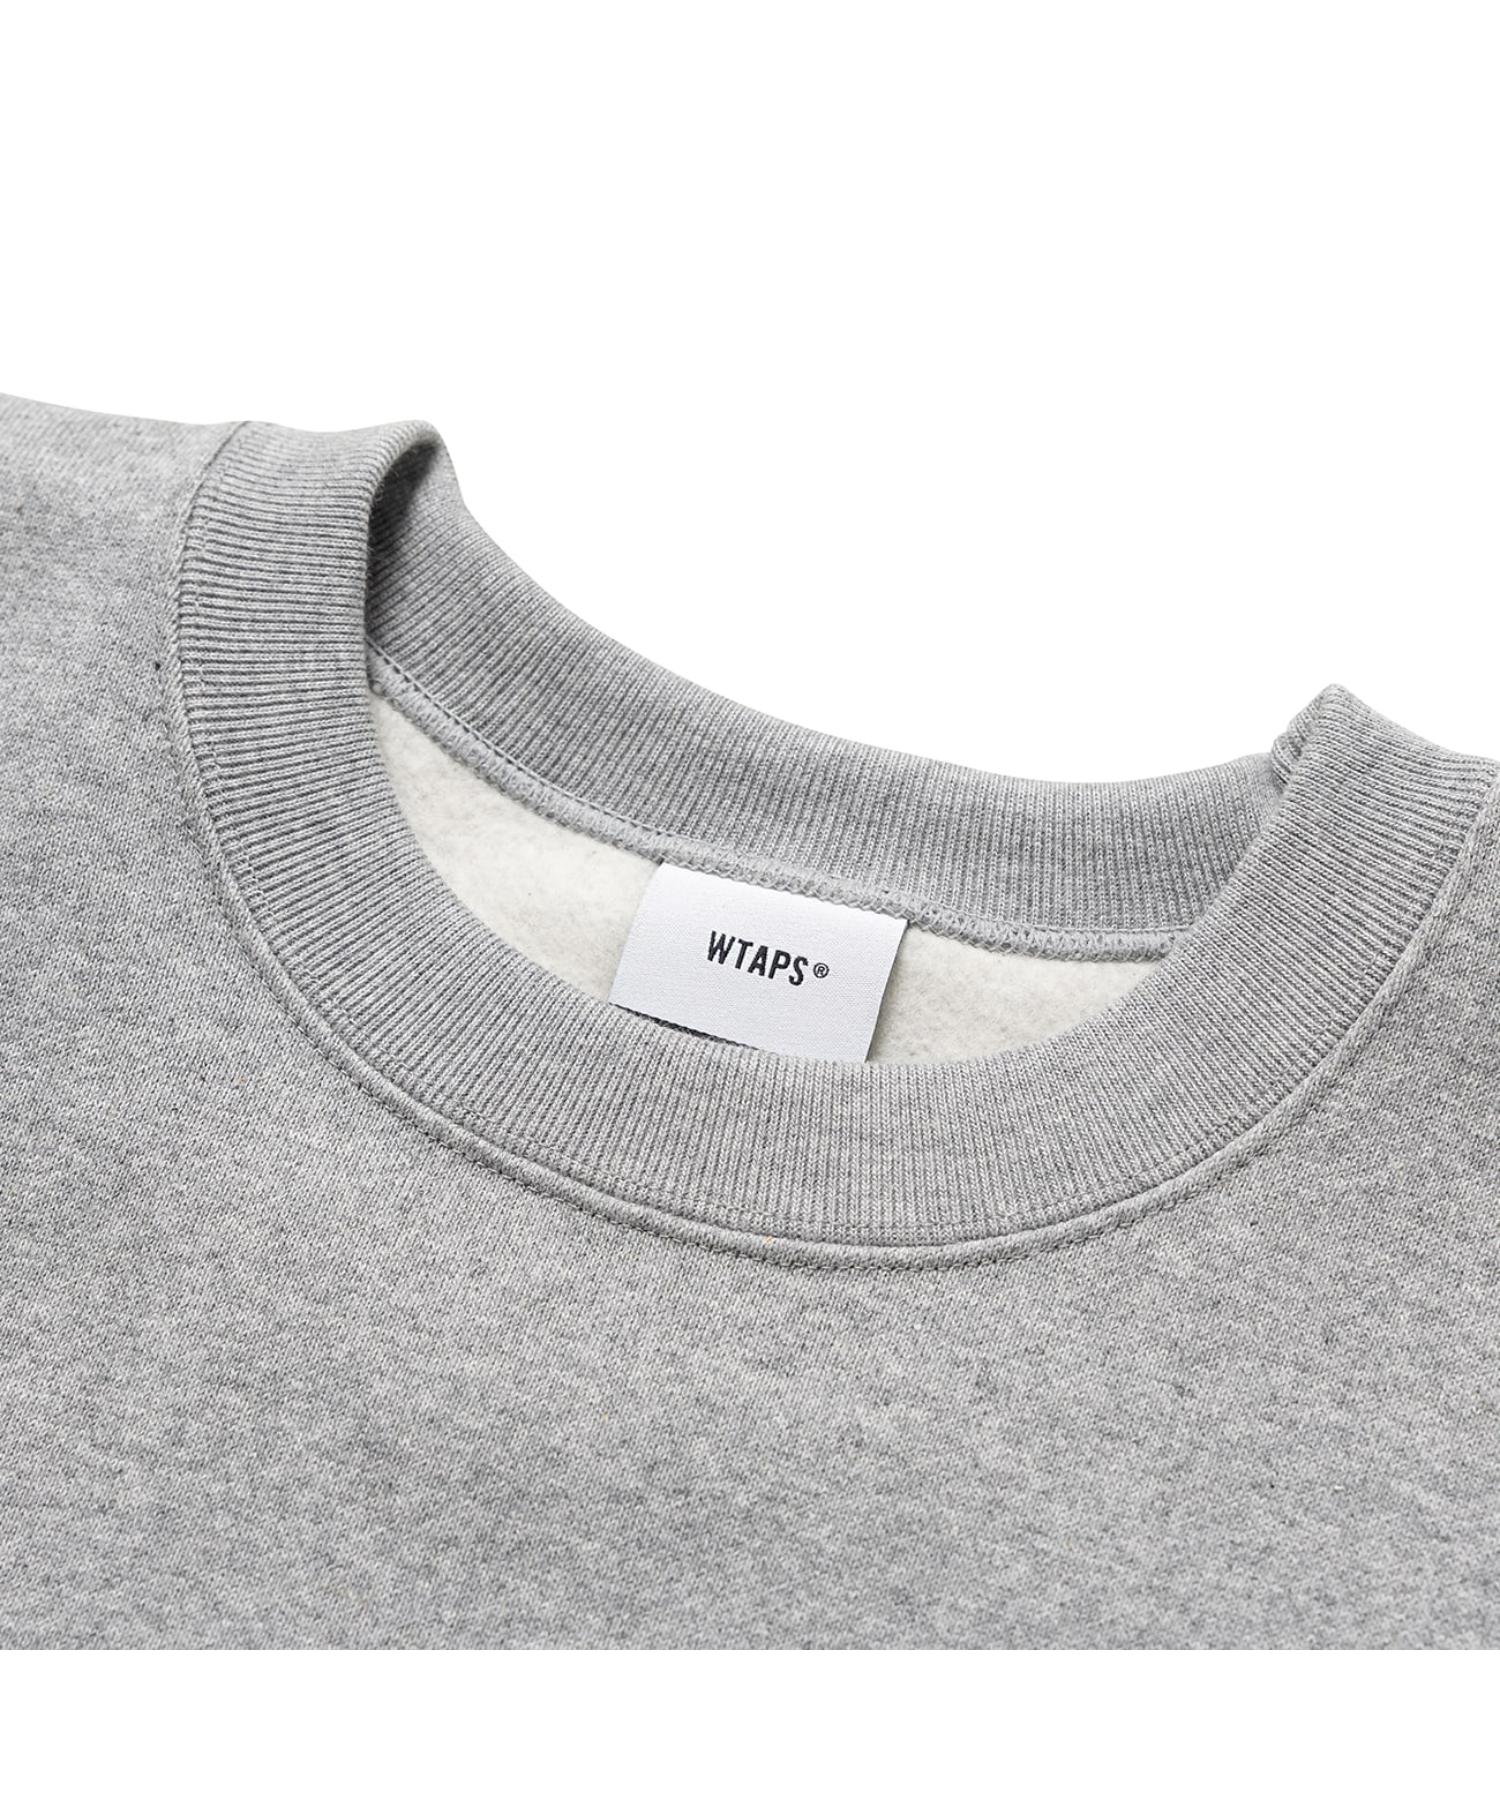 FORTLESS / SWEATER / COTTON - WTAPS (ダブルタップス) - tops 